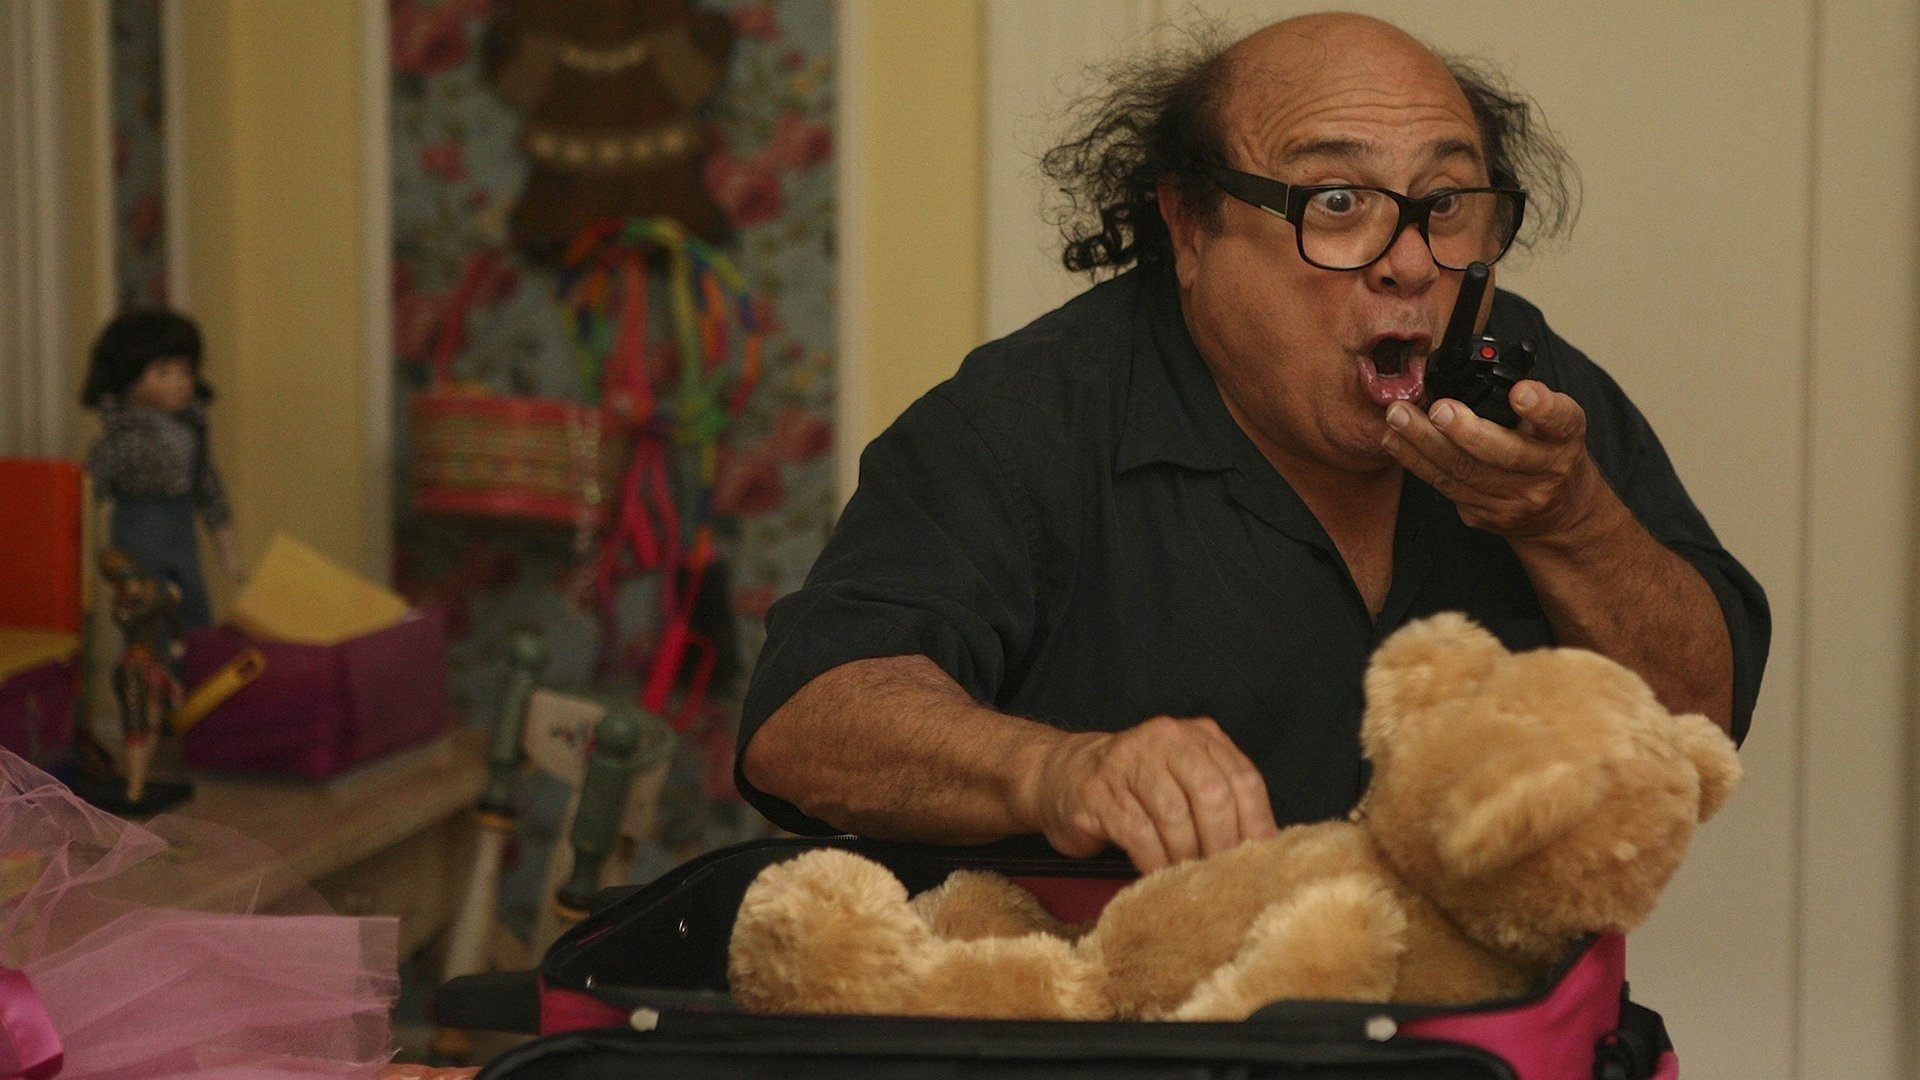 Danny DeVito: The 1987 American Comedy Award nominee for Funniest Lead Actor in a Motion Picture. 1920x1080 Full HD Wallpaper.